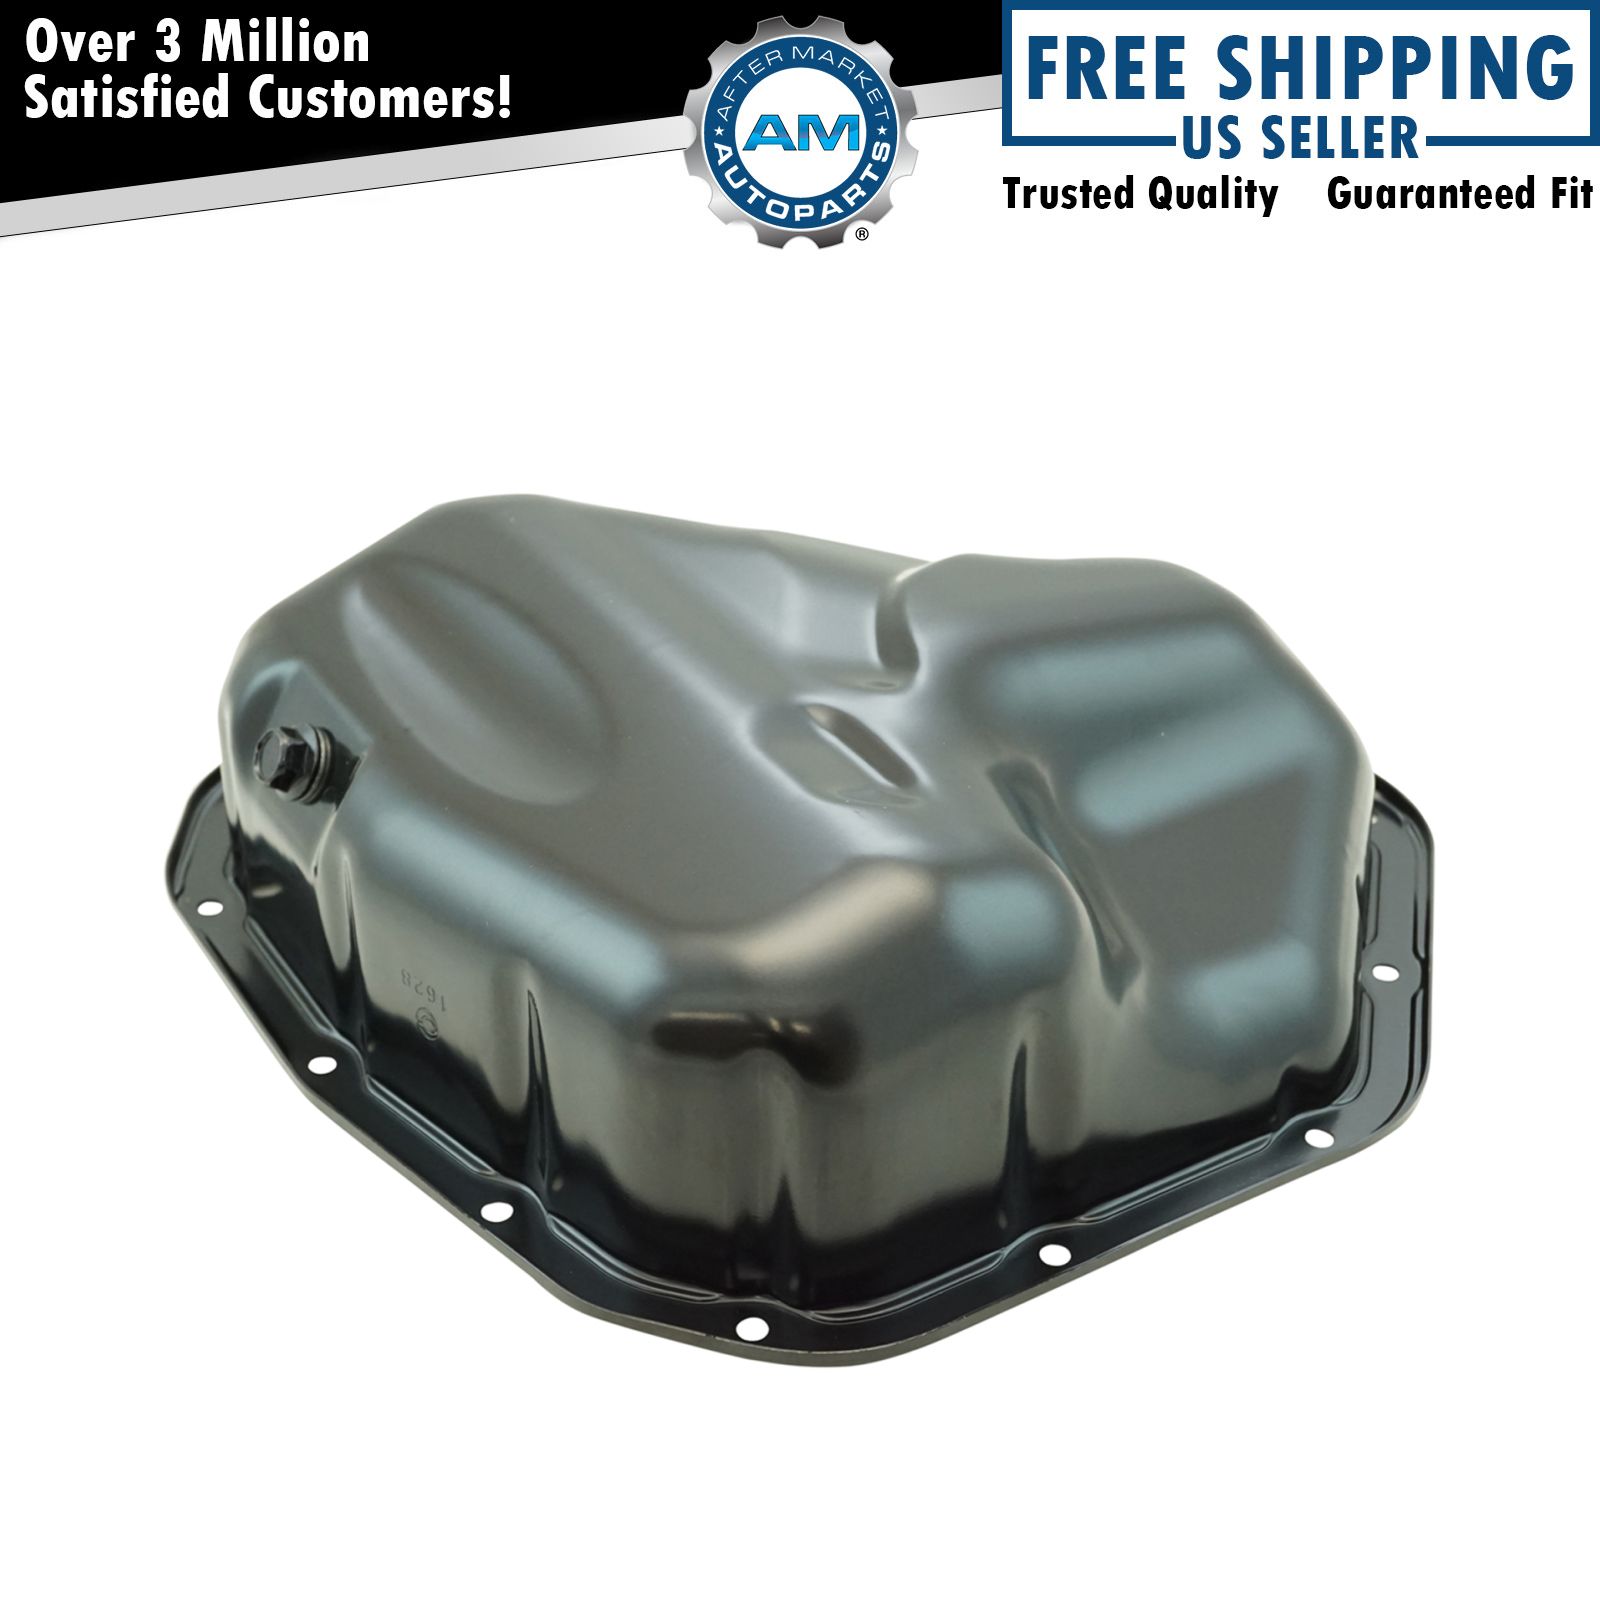 Steel Lower Engine Oil Pan for Toyota Avalon Camry Highlander Sienna Venza New